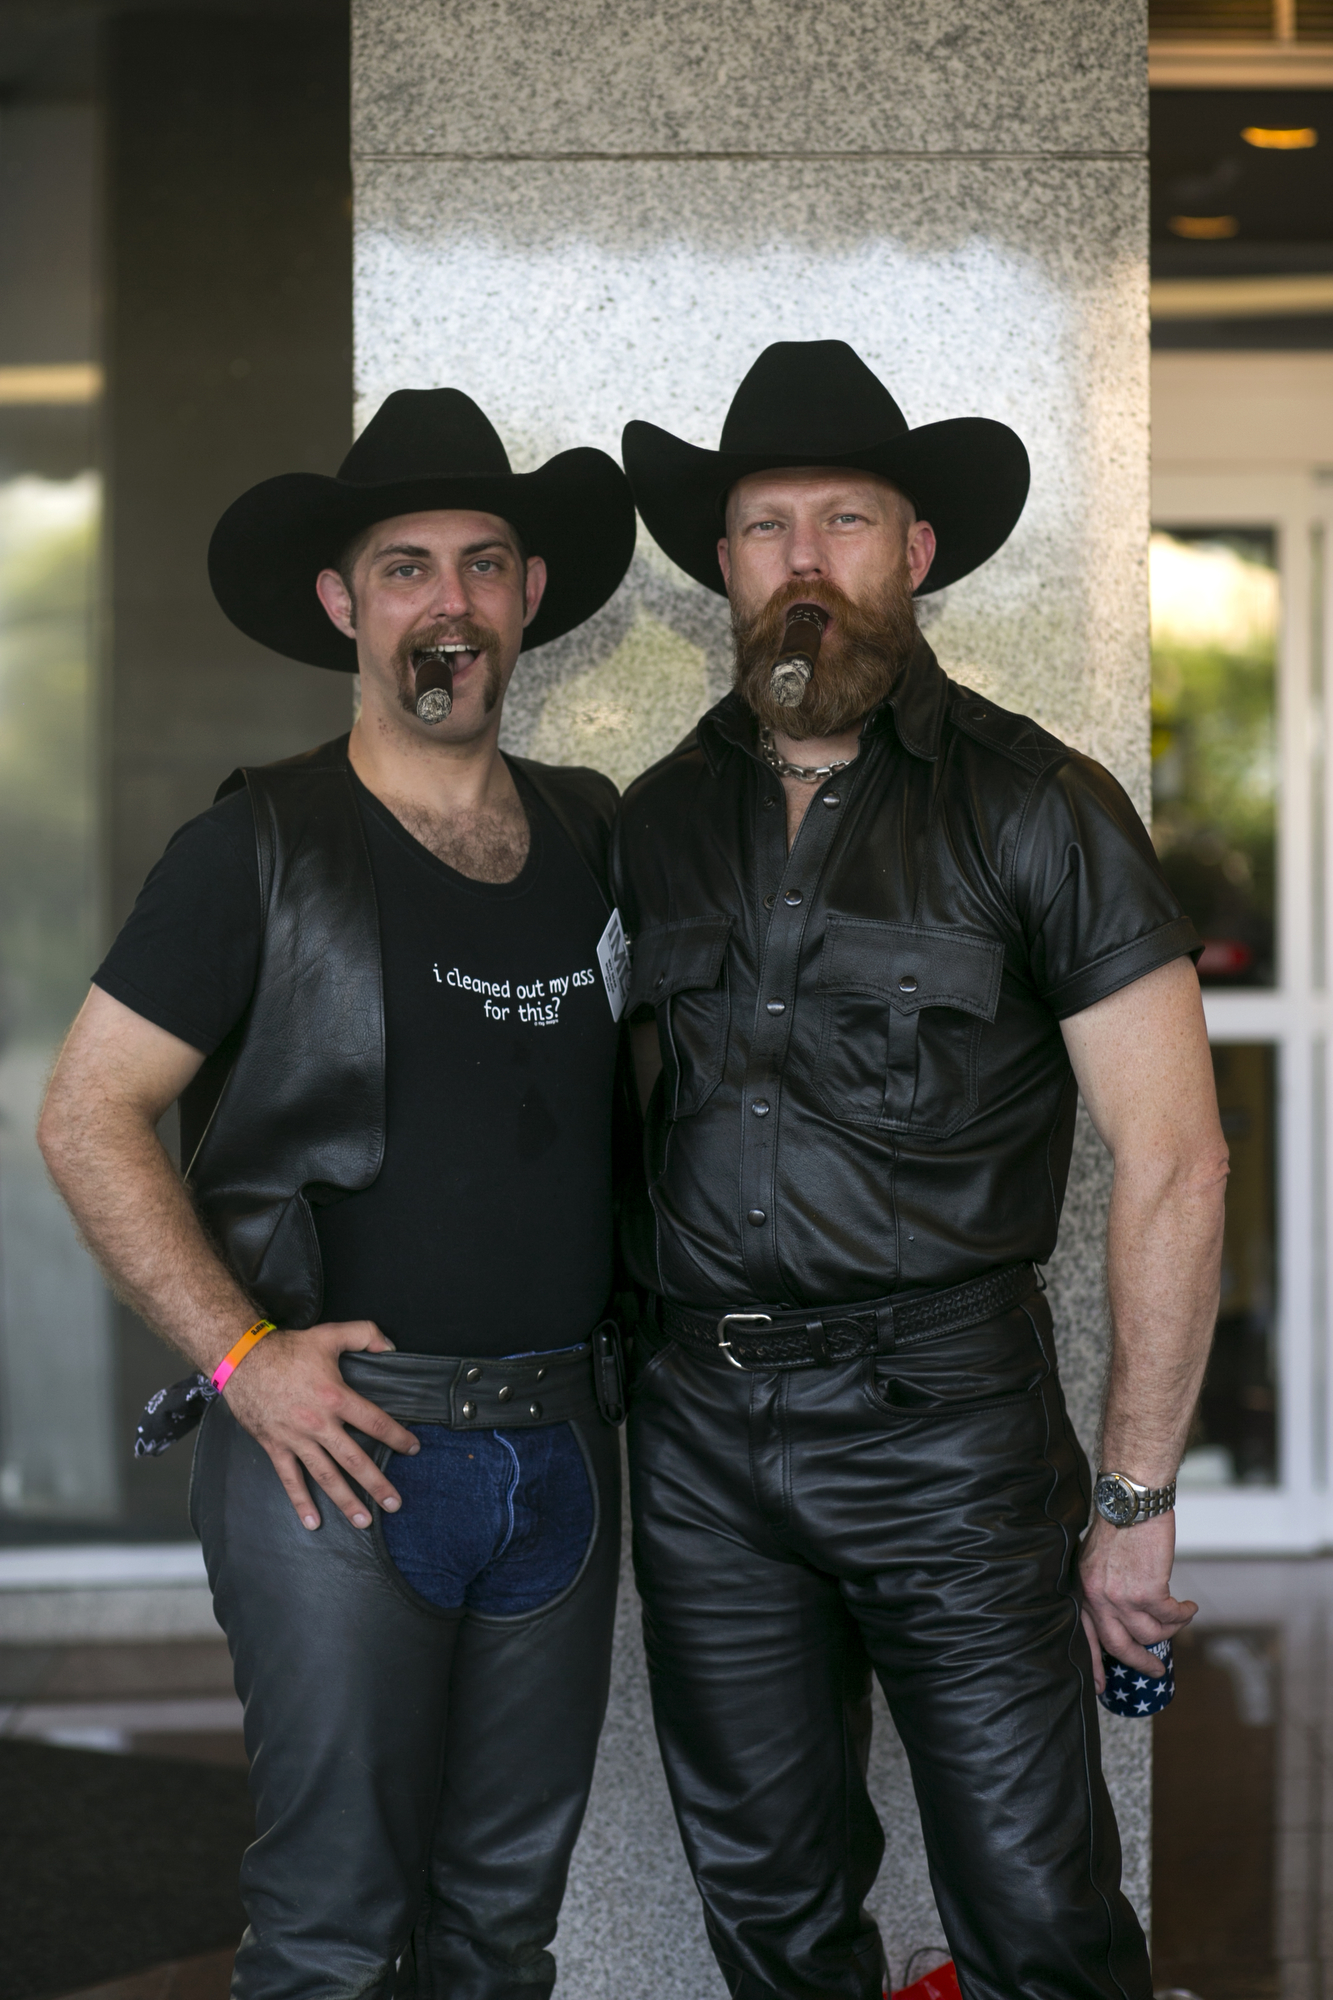  Sean, from Madison, WI, left, and Carl, from Fort Worth, right, at The 38th Annual International Mr. Leather held at The Congress Plaza Hotel in Chicago, on Saturday, May 28, 2016. 